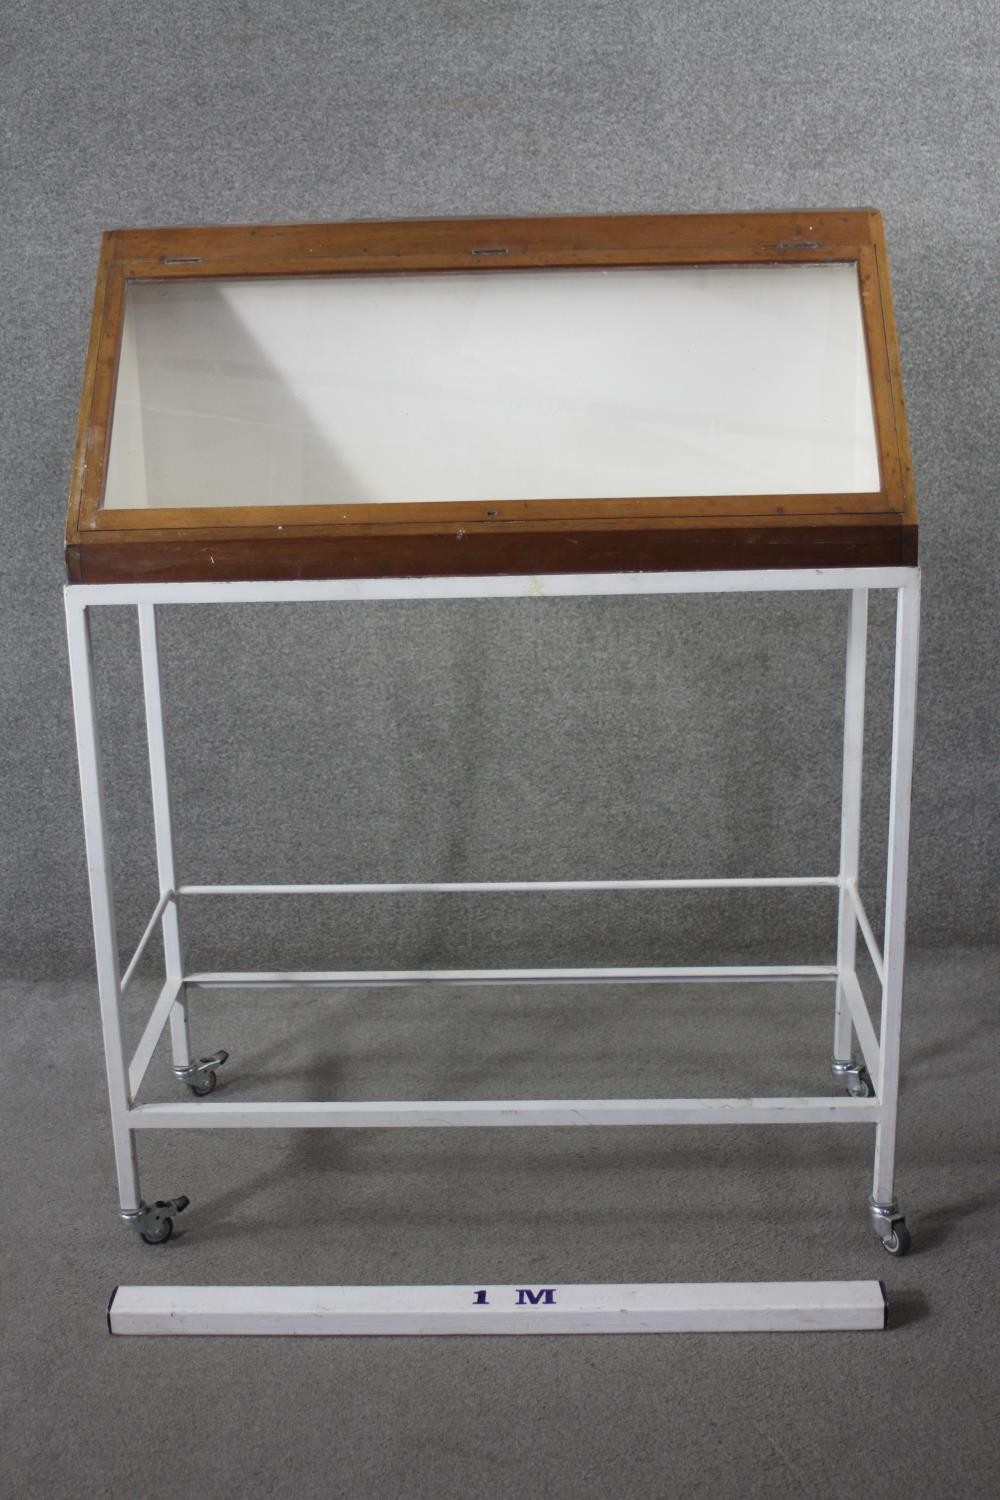 A lidded glazed mahogany display case on metal framed stand fitted with locking castors, from the - Image 5 of 5